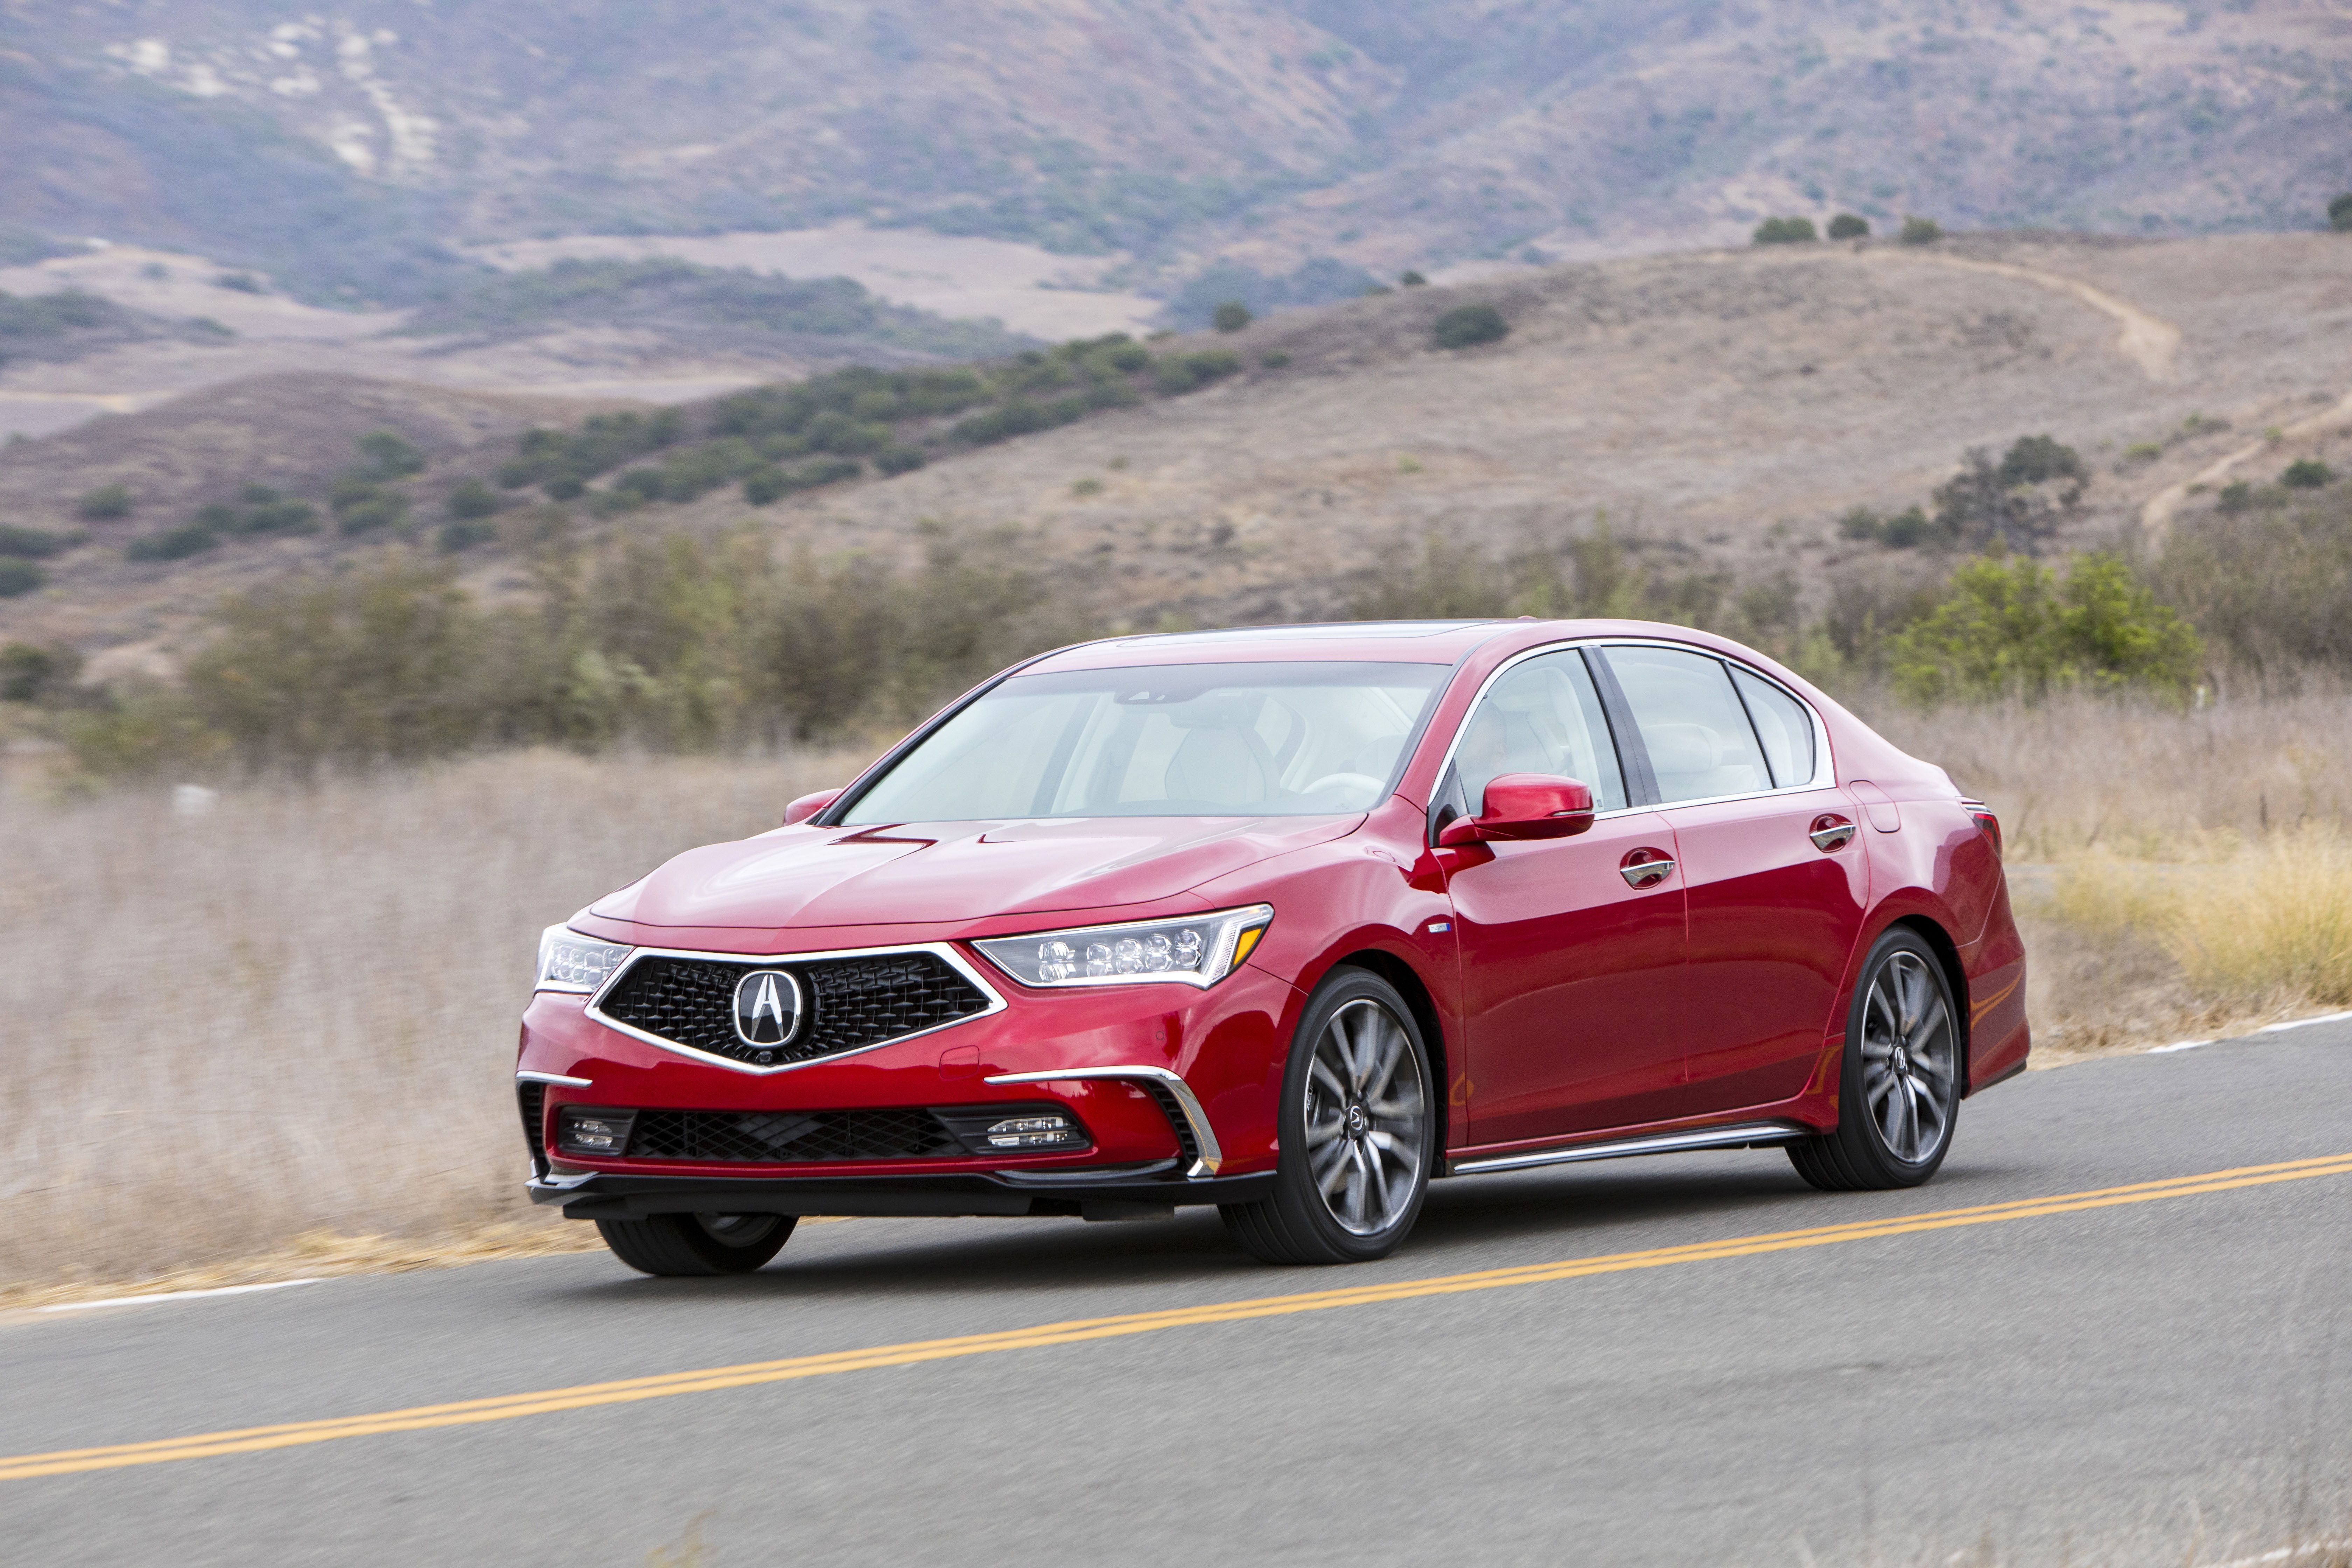 2020 Acura RLX Review, Pricing, and Specs